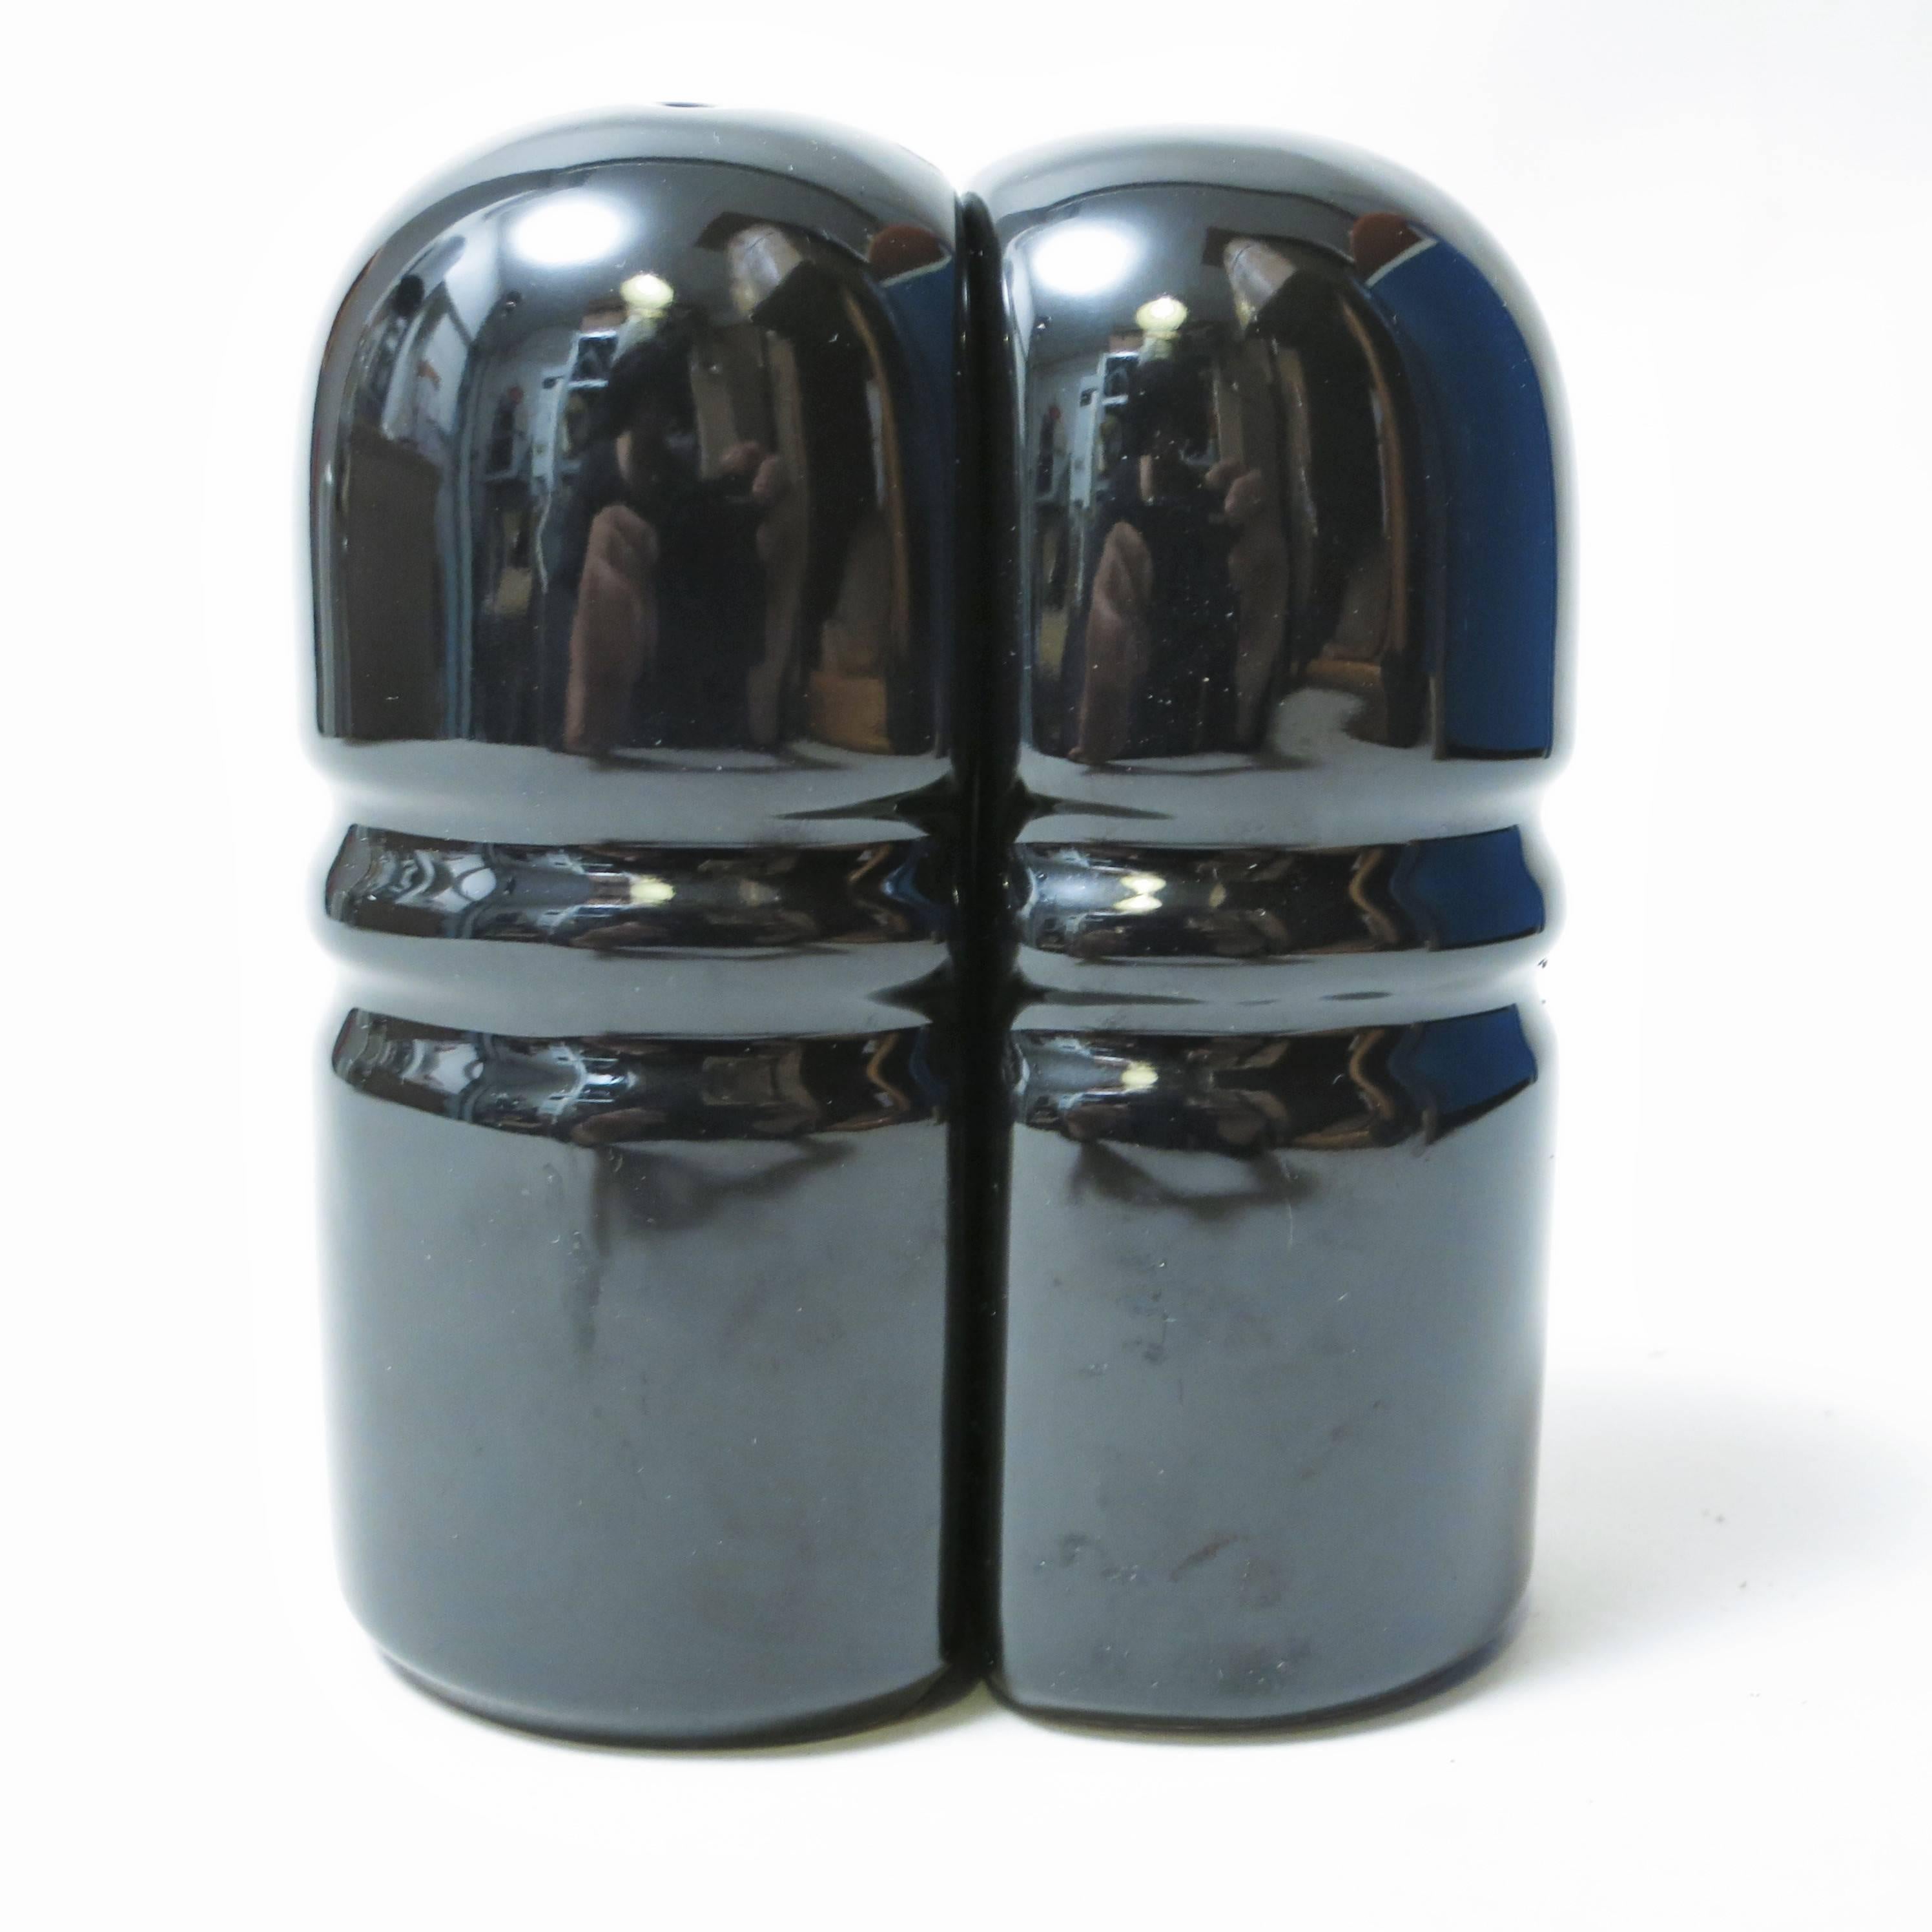 Ceramic Salt and Pepper Shakers by Pino Spagnolo Sicart